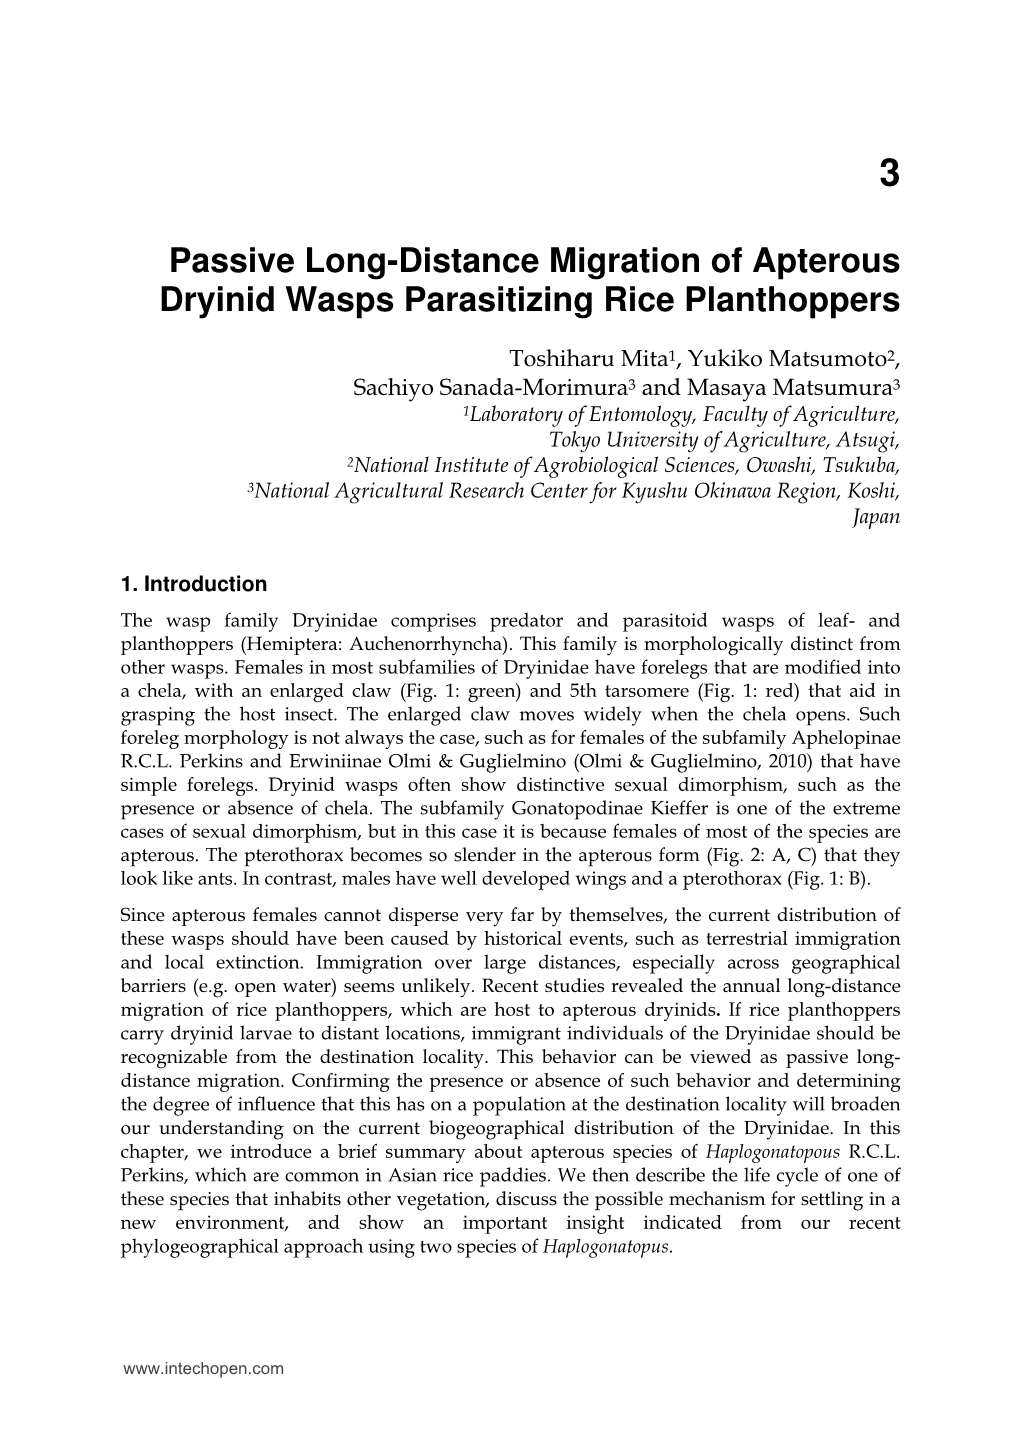 Passive Long-Distance Migration of Apterous Dryinid Wasps Parasitizing Rice Planthoppers